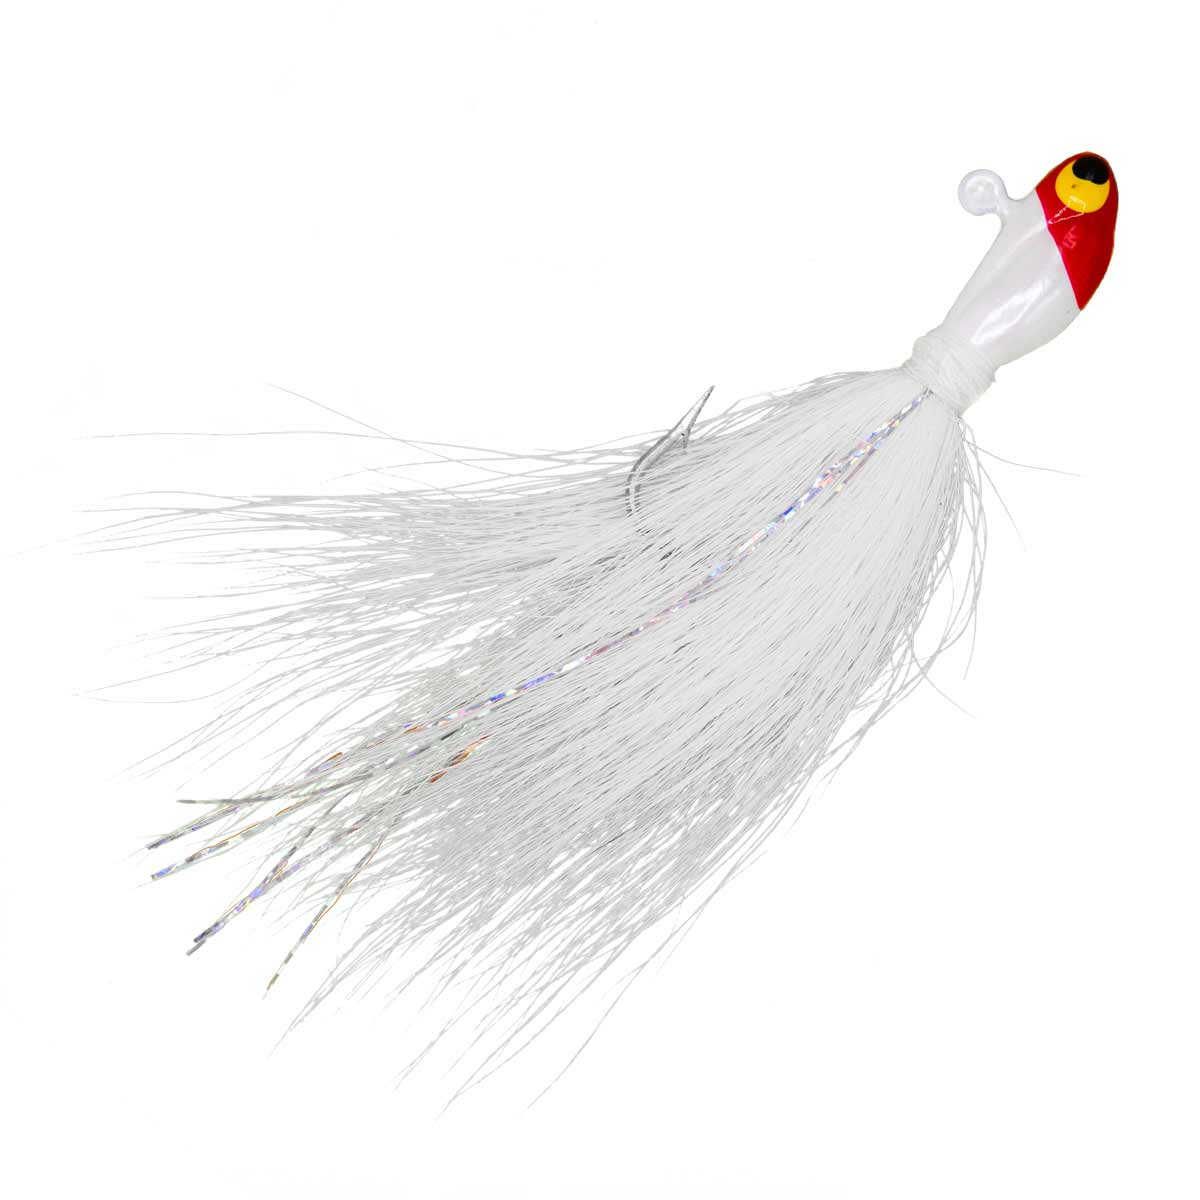 potbelly bucktail jig 1/4 oz white red